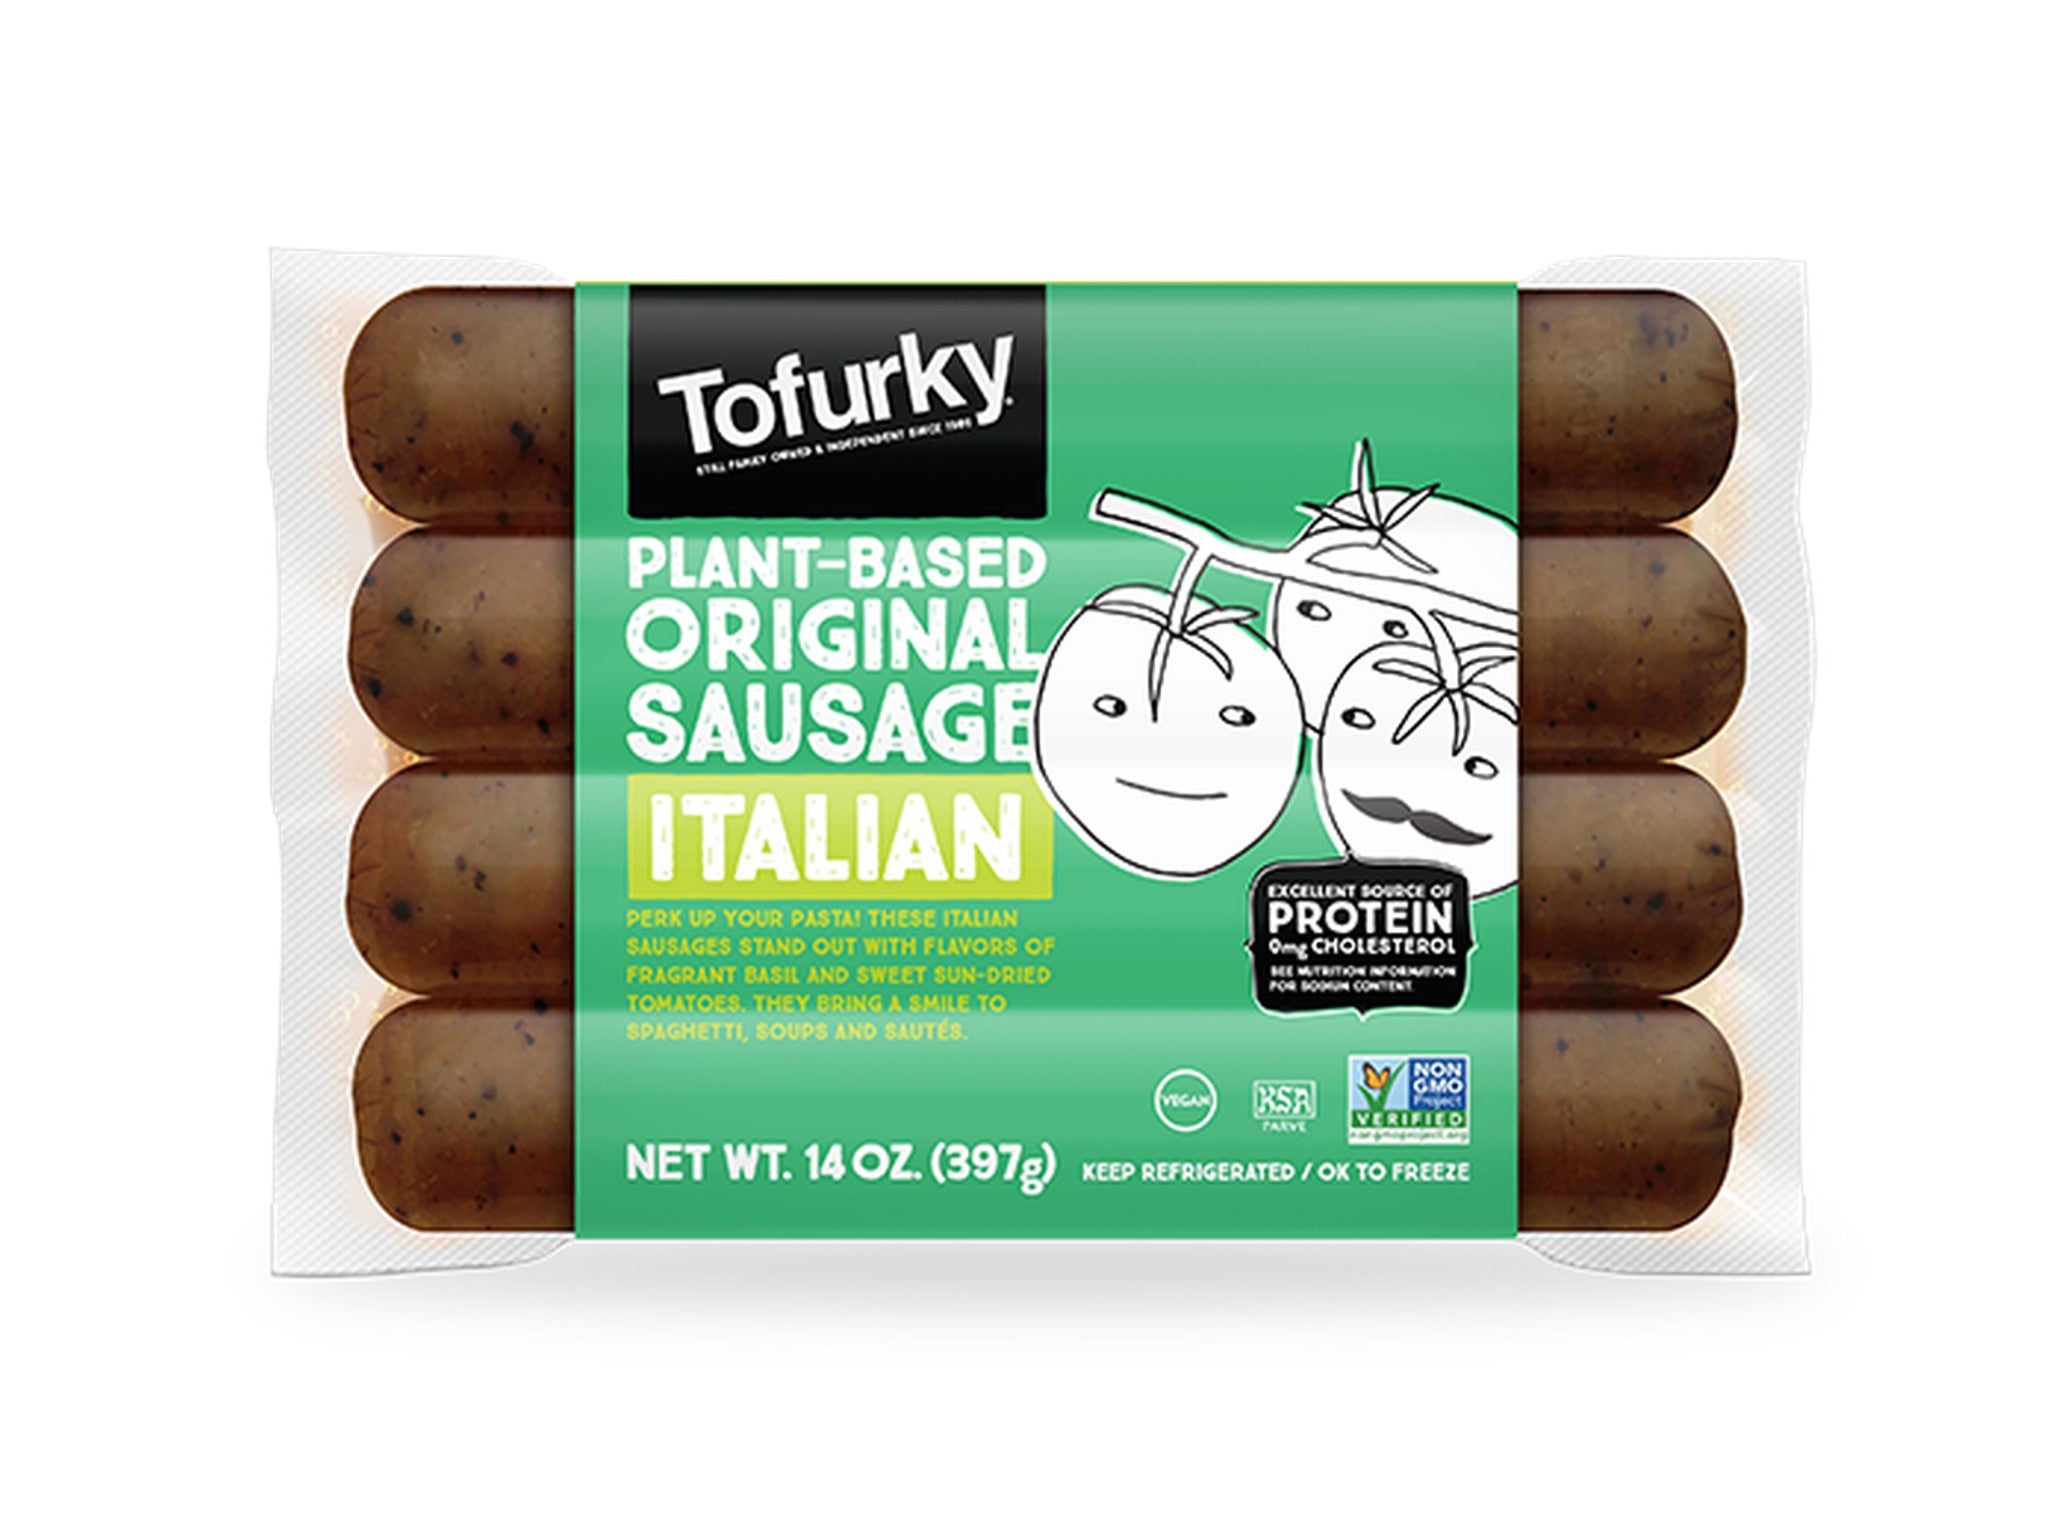 Tofurky plant-based Italian inspired sausages indybest.jpg